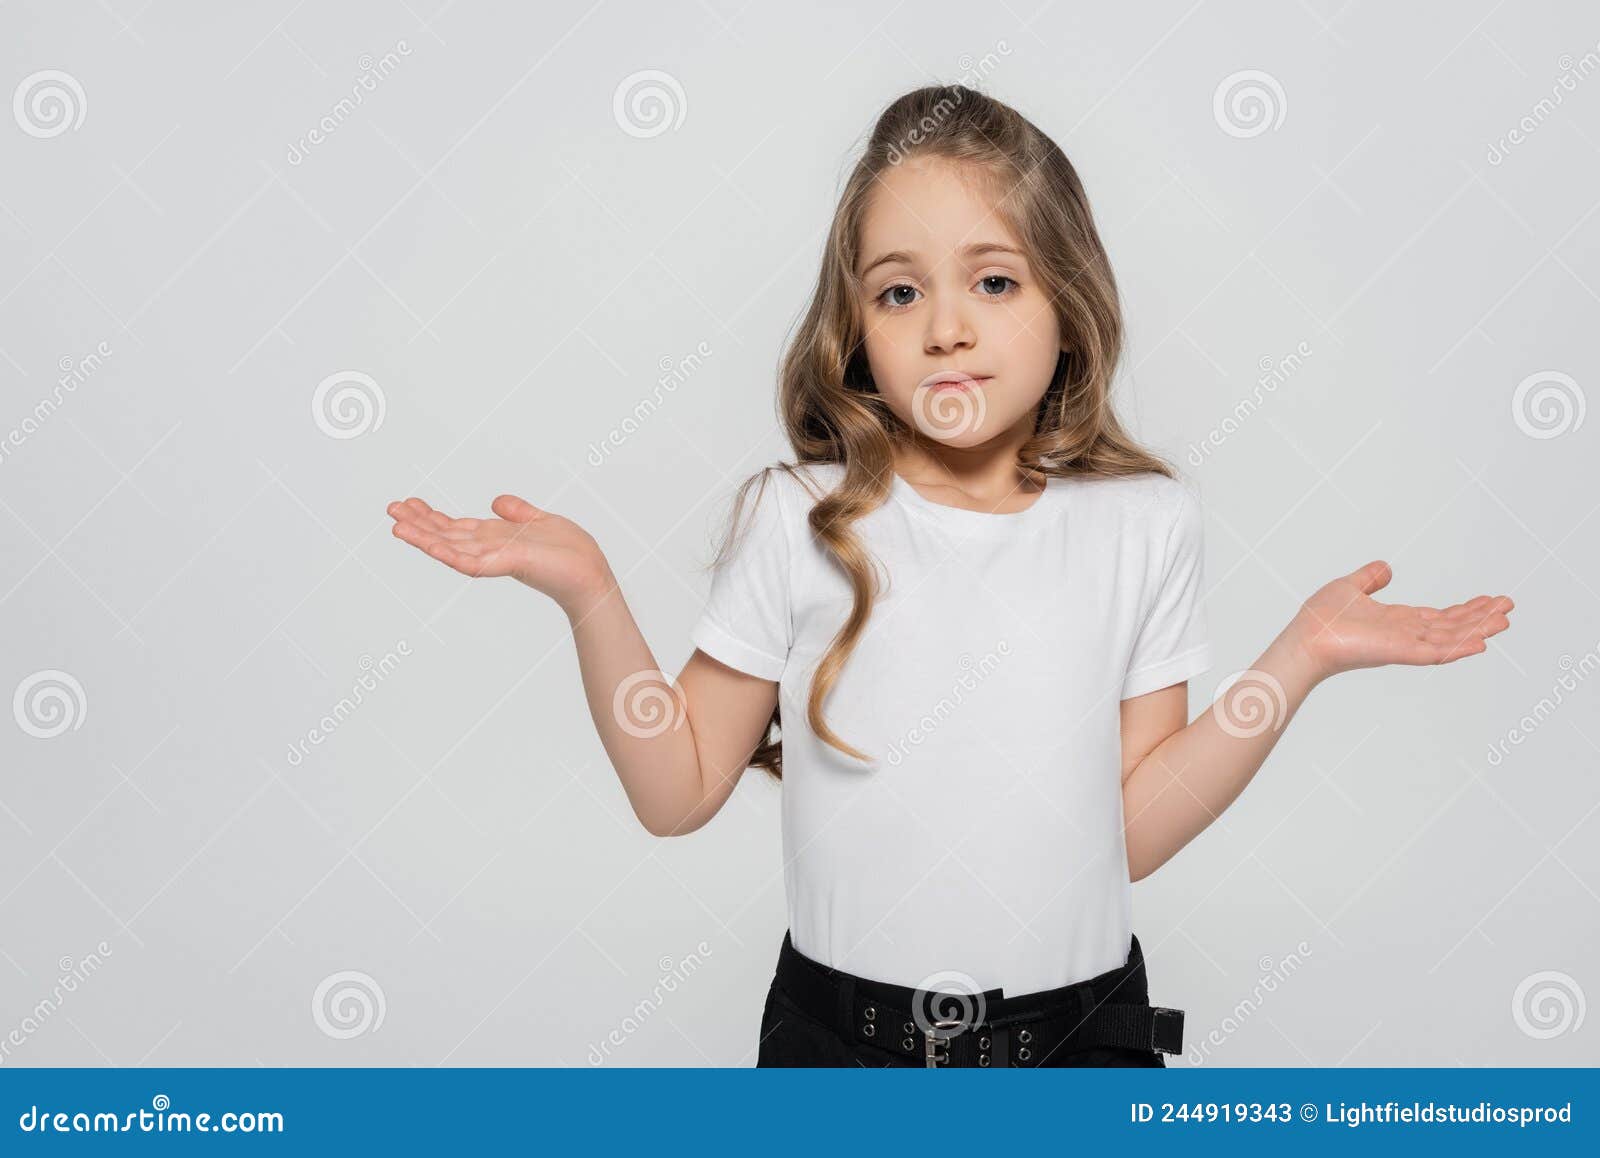 Confused Girl Showing Shrug Gesture While Stock Image Image Of Girl Casual